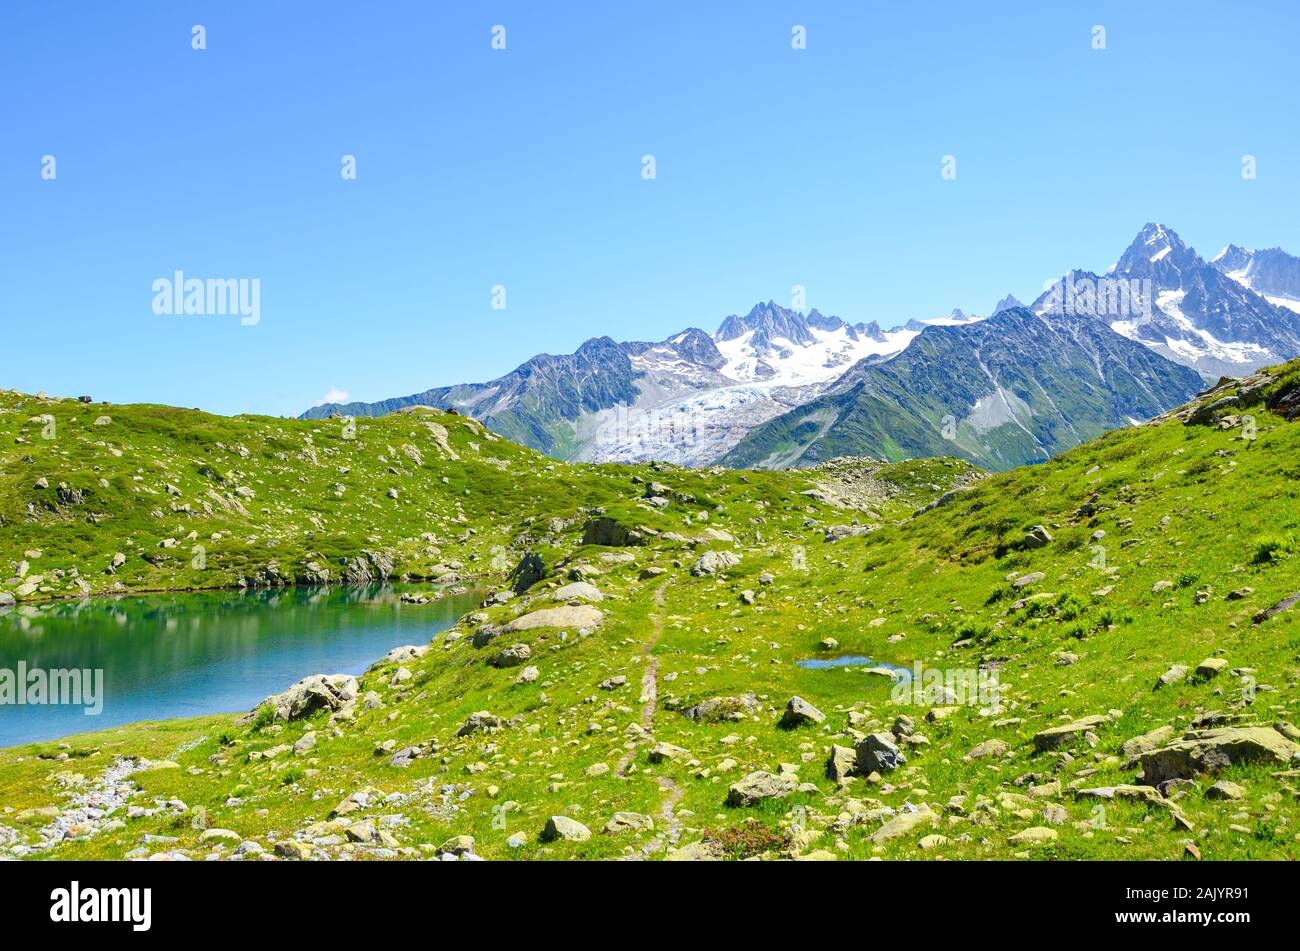 Alpine Lac de Cheserys, Lake Cheserys near Chamonix-Mont-Blanc in French Alps. Glacier lake with high mountains in the background. Tour du Mont Blanc trail. Green Alpine landscape. Stock Photo